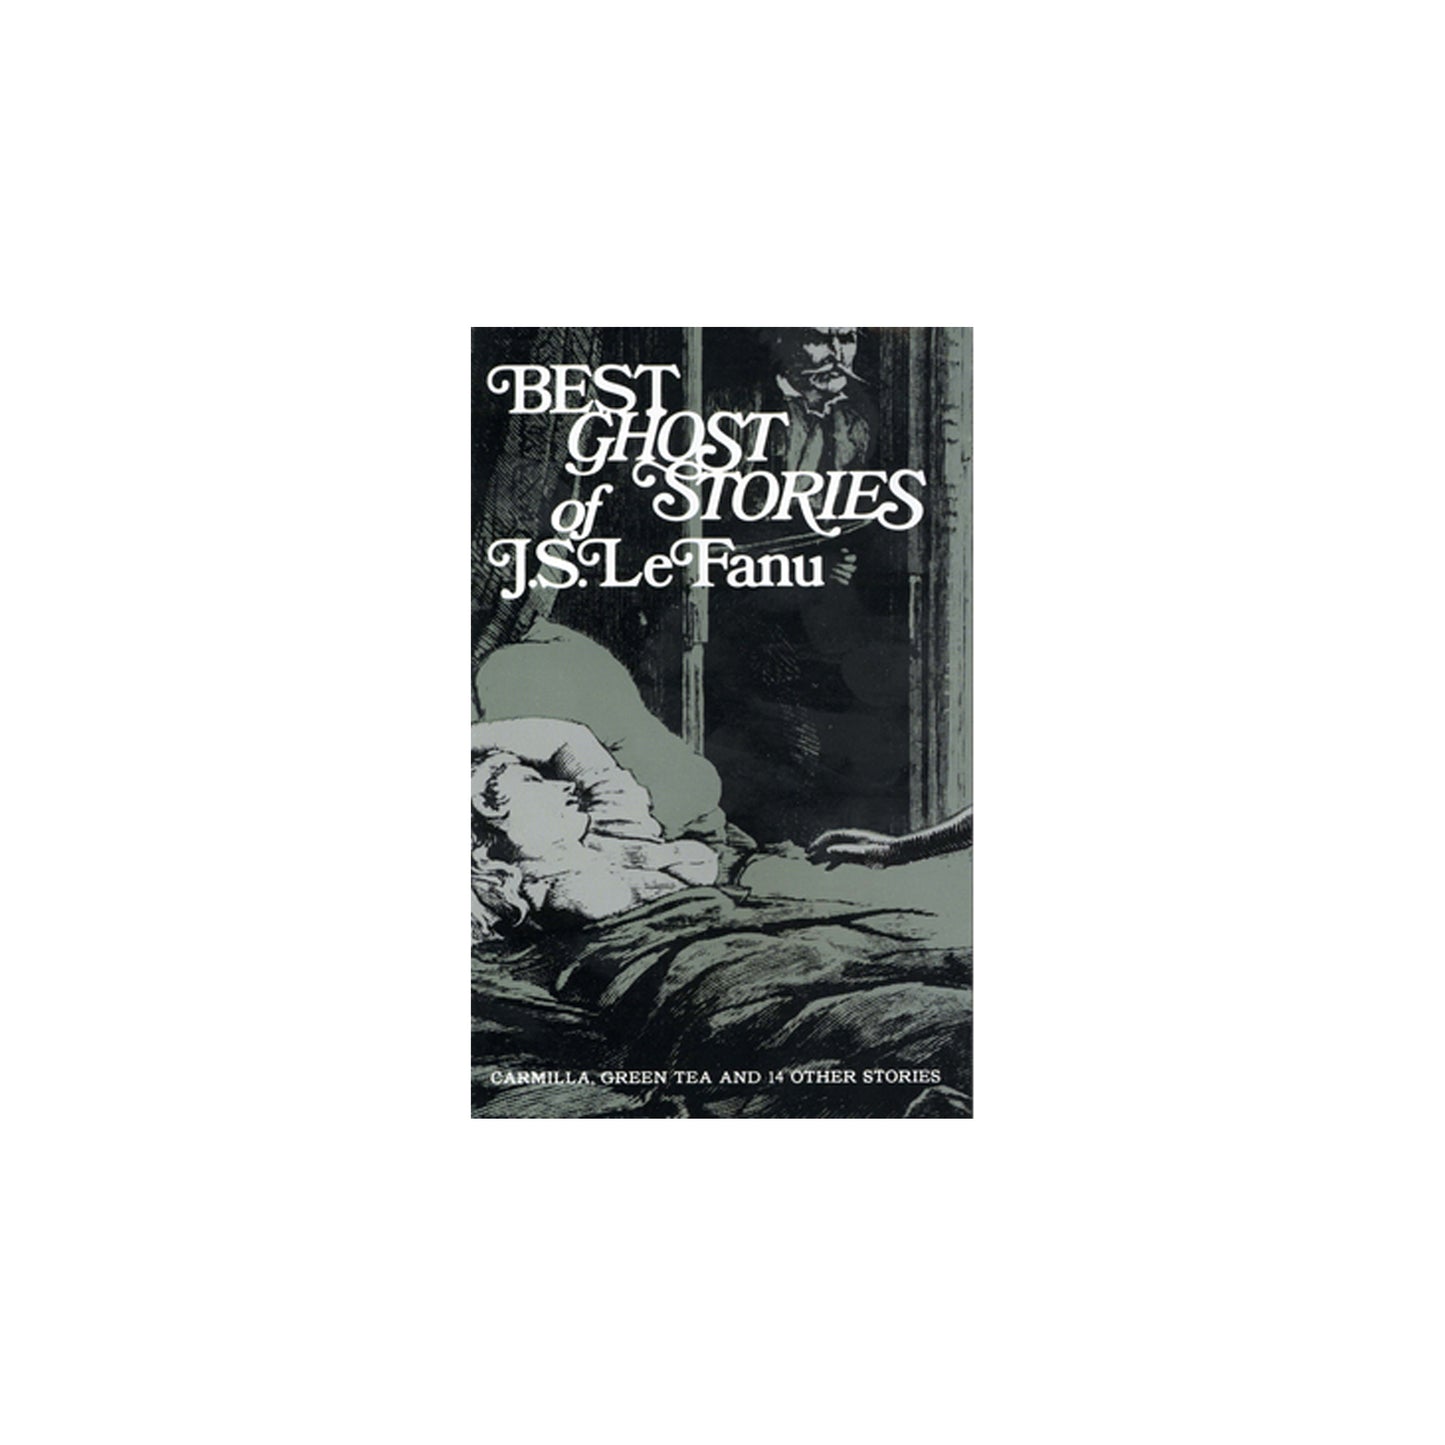 Best Ghost Stories of J.S. Le Fanu